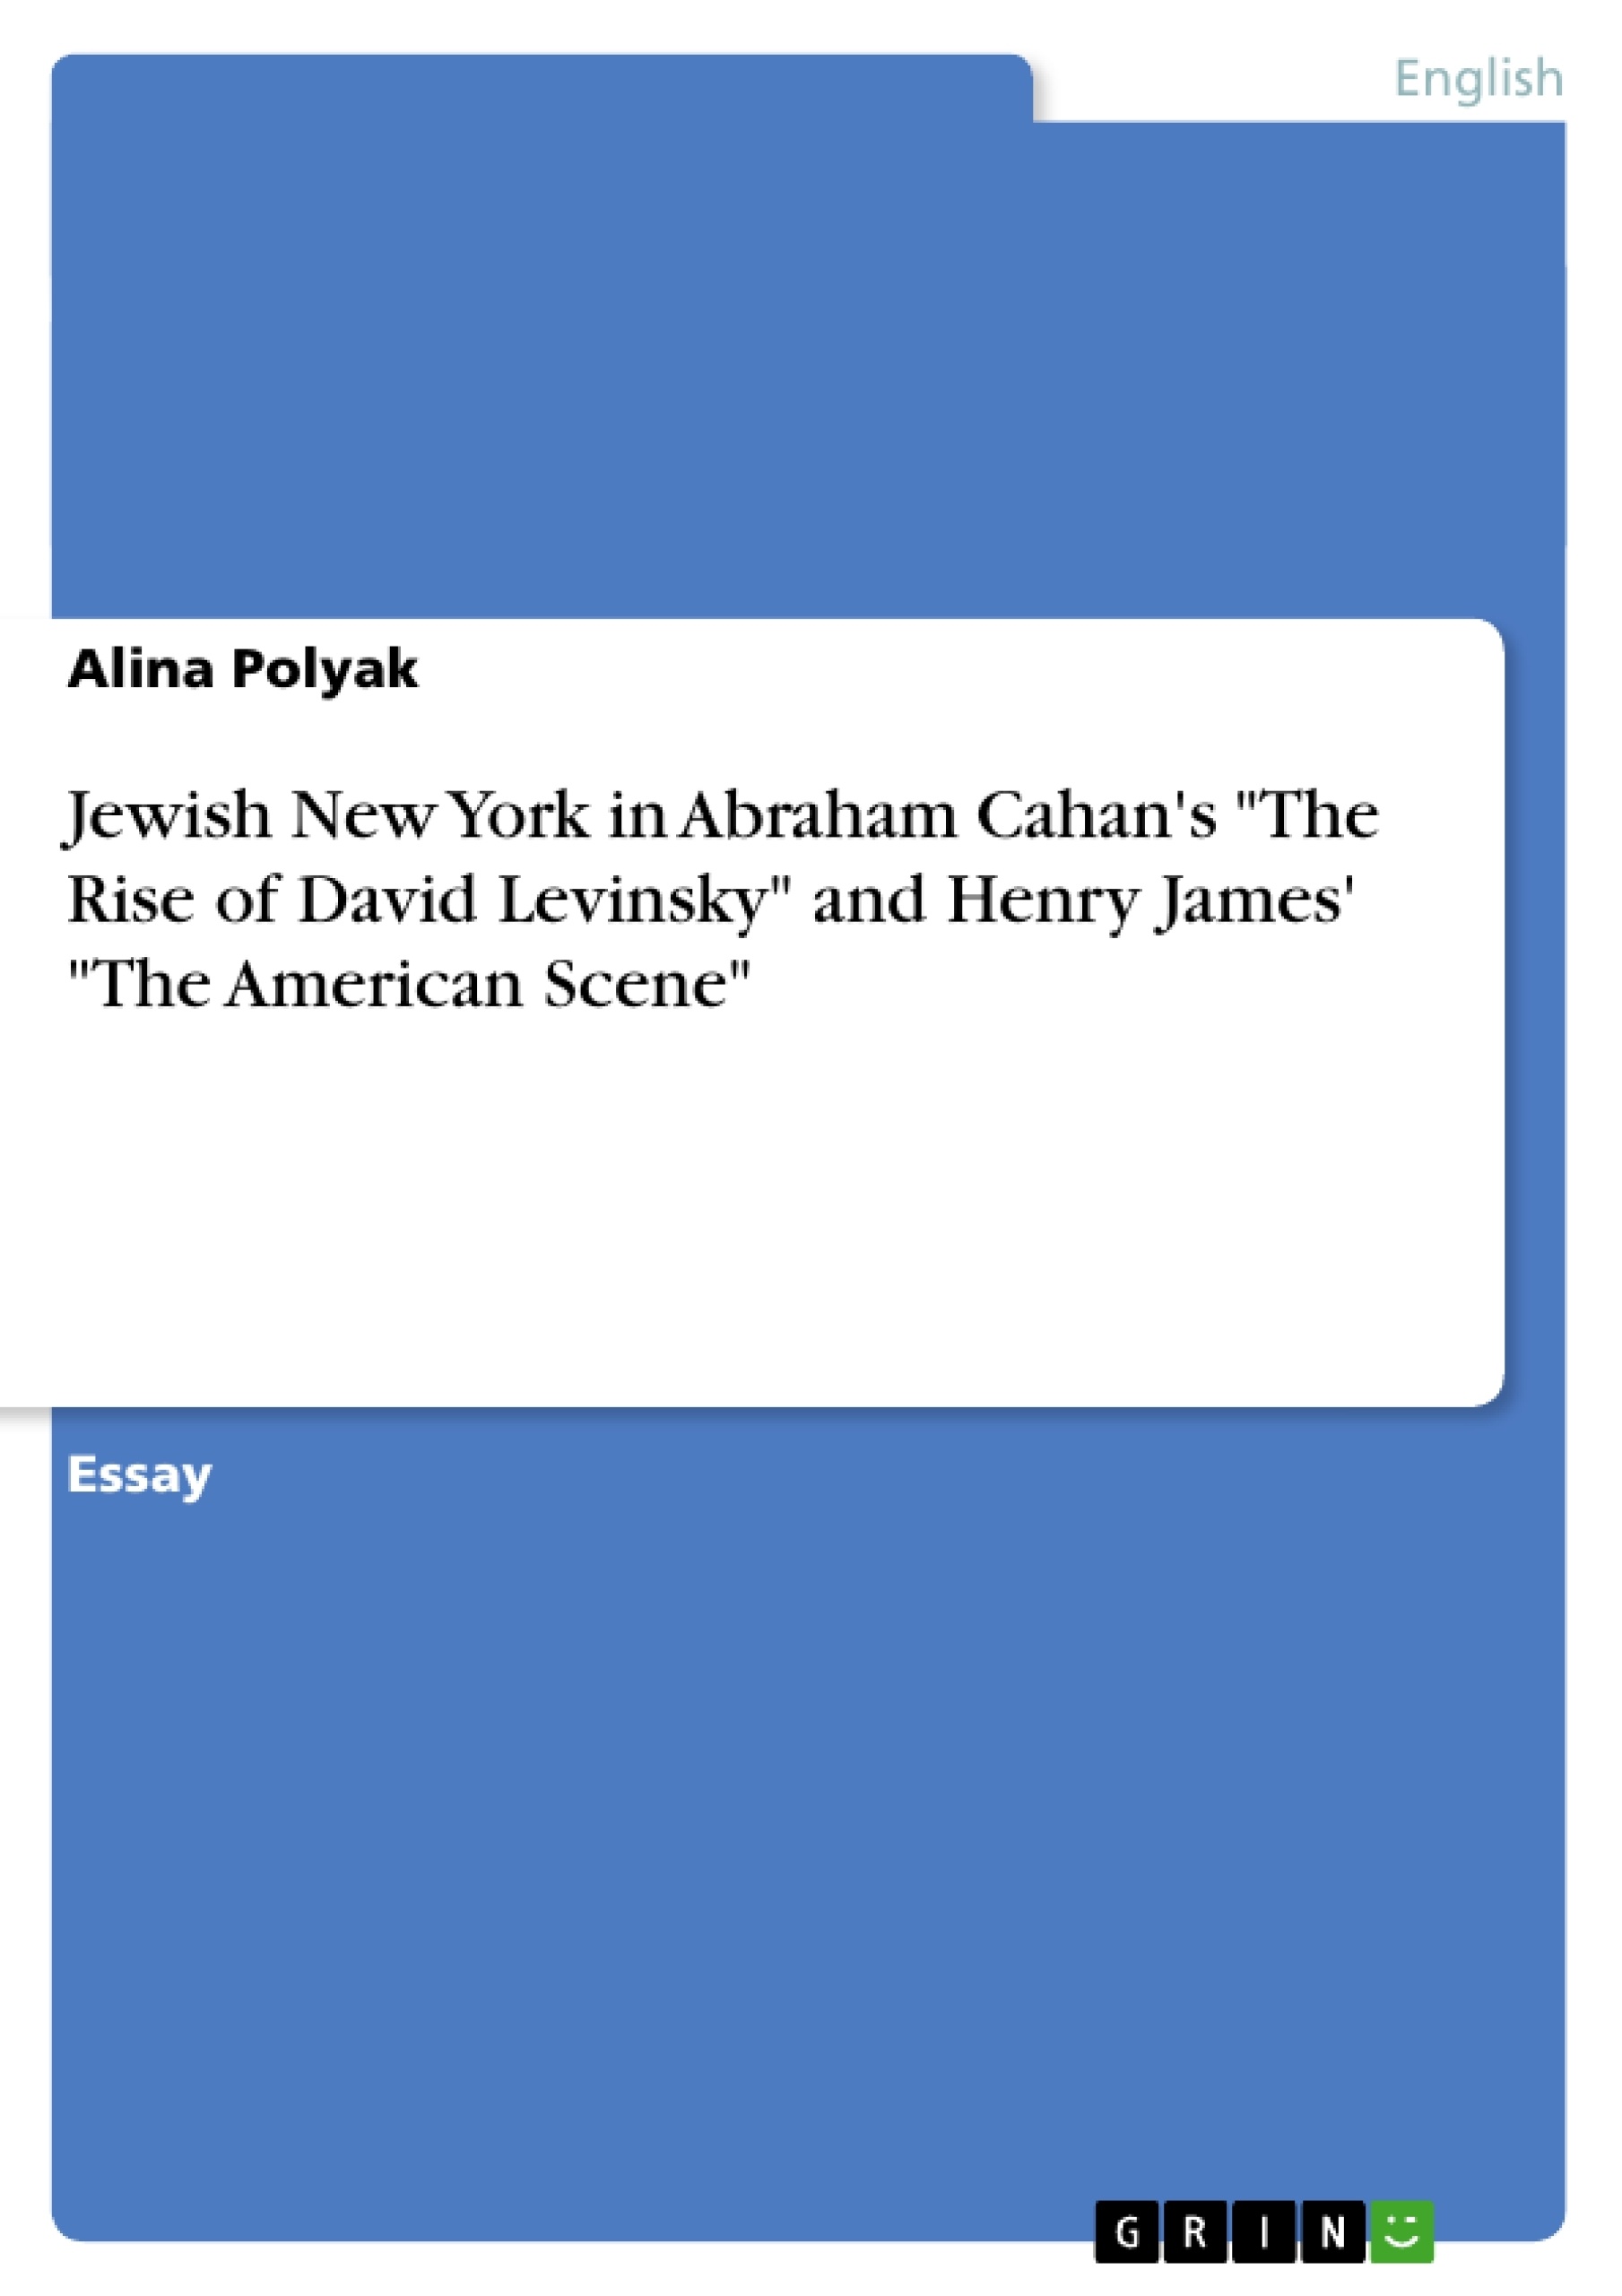 Titre: Jewish New York in Abraham Cahan's "The Rise of David Levinsky" and Henry James'  "The American Scene"